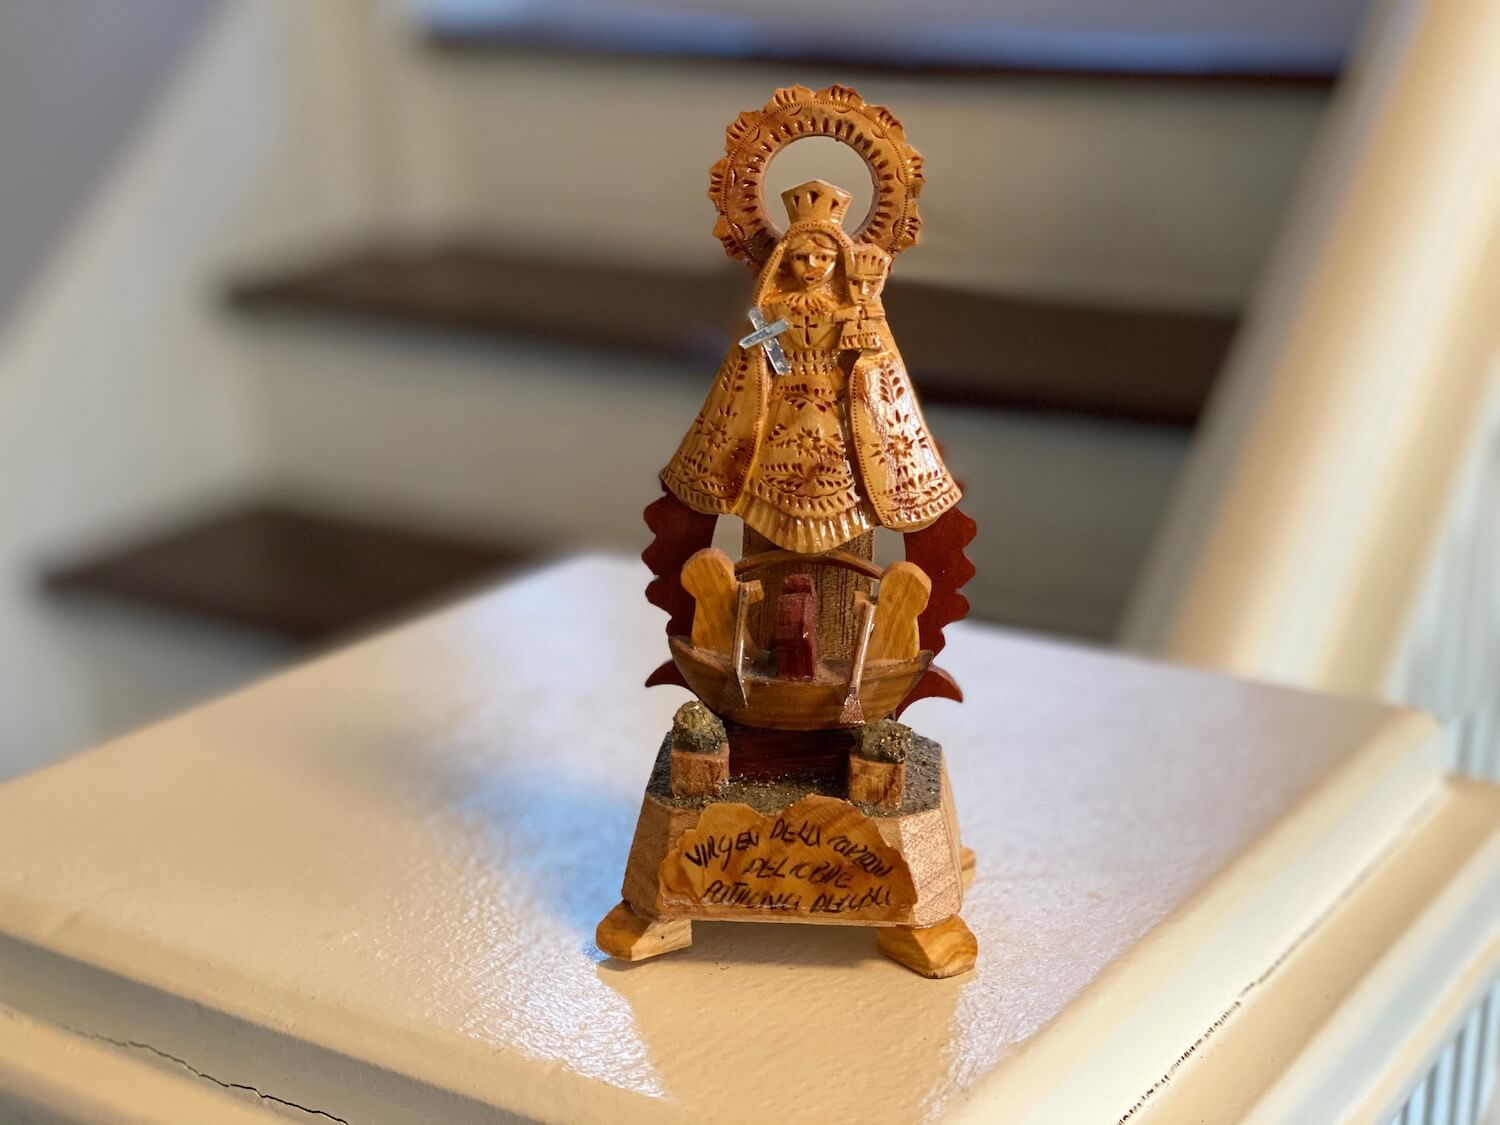 This travel souvenir from Cuba was picked up near Santiago at the National Shrine Basilica of Our Lady of Charity. It has soul and is carved from local wood and depicts Mary, with a silver cross appearing above a boat with two fisherman rowing. Mary has a circular halo above her head.